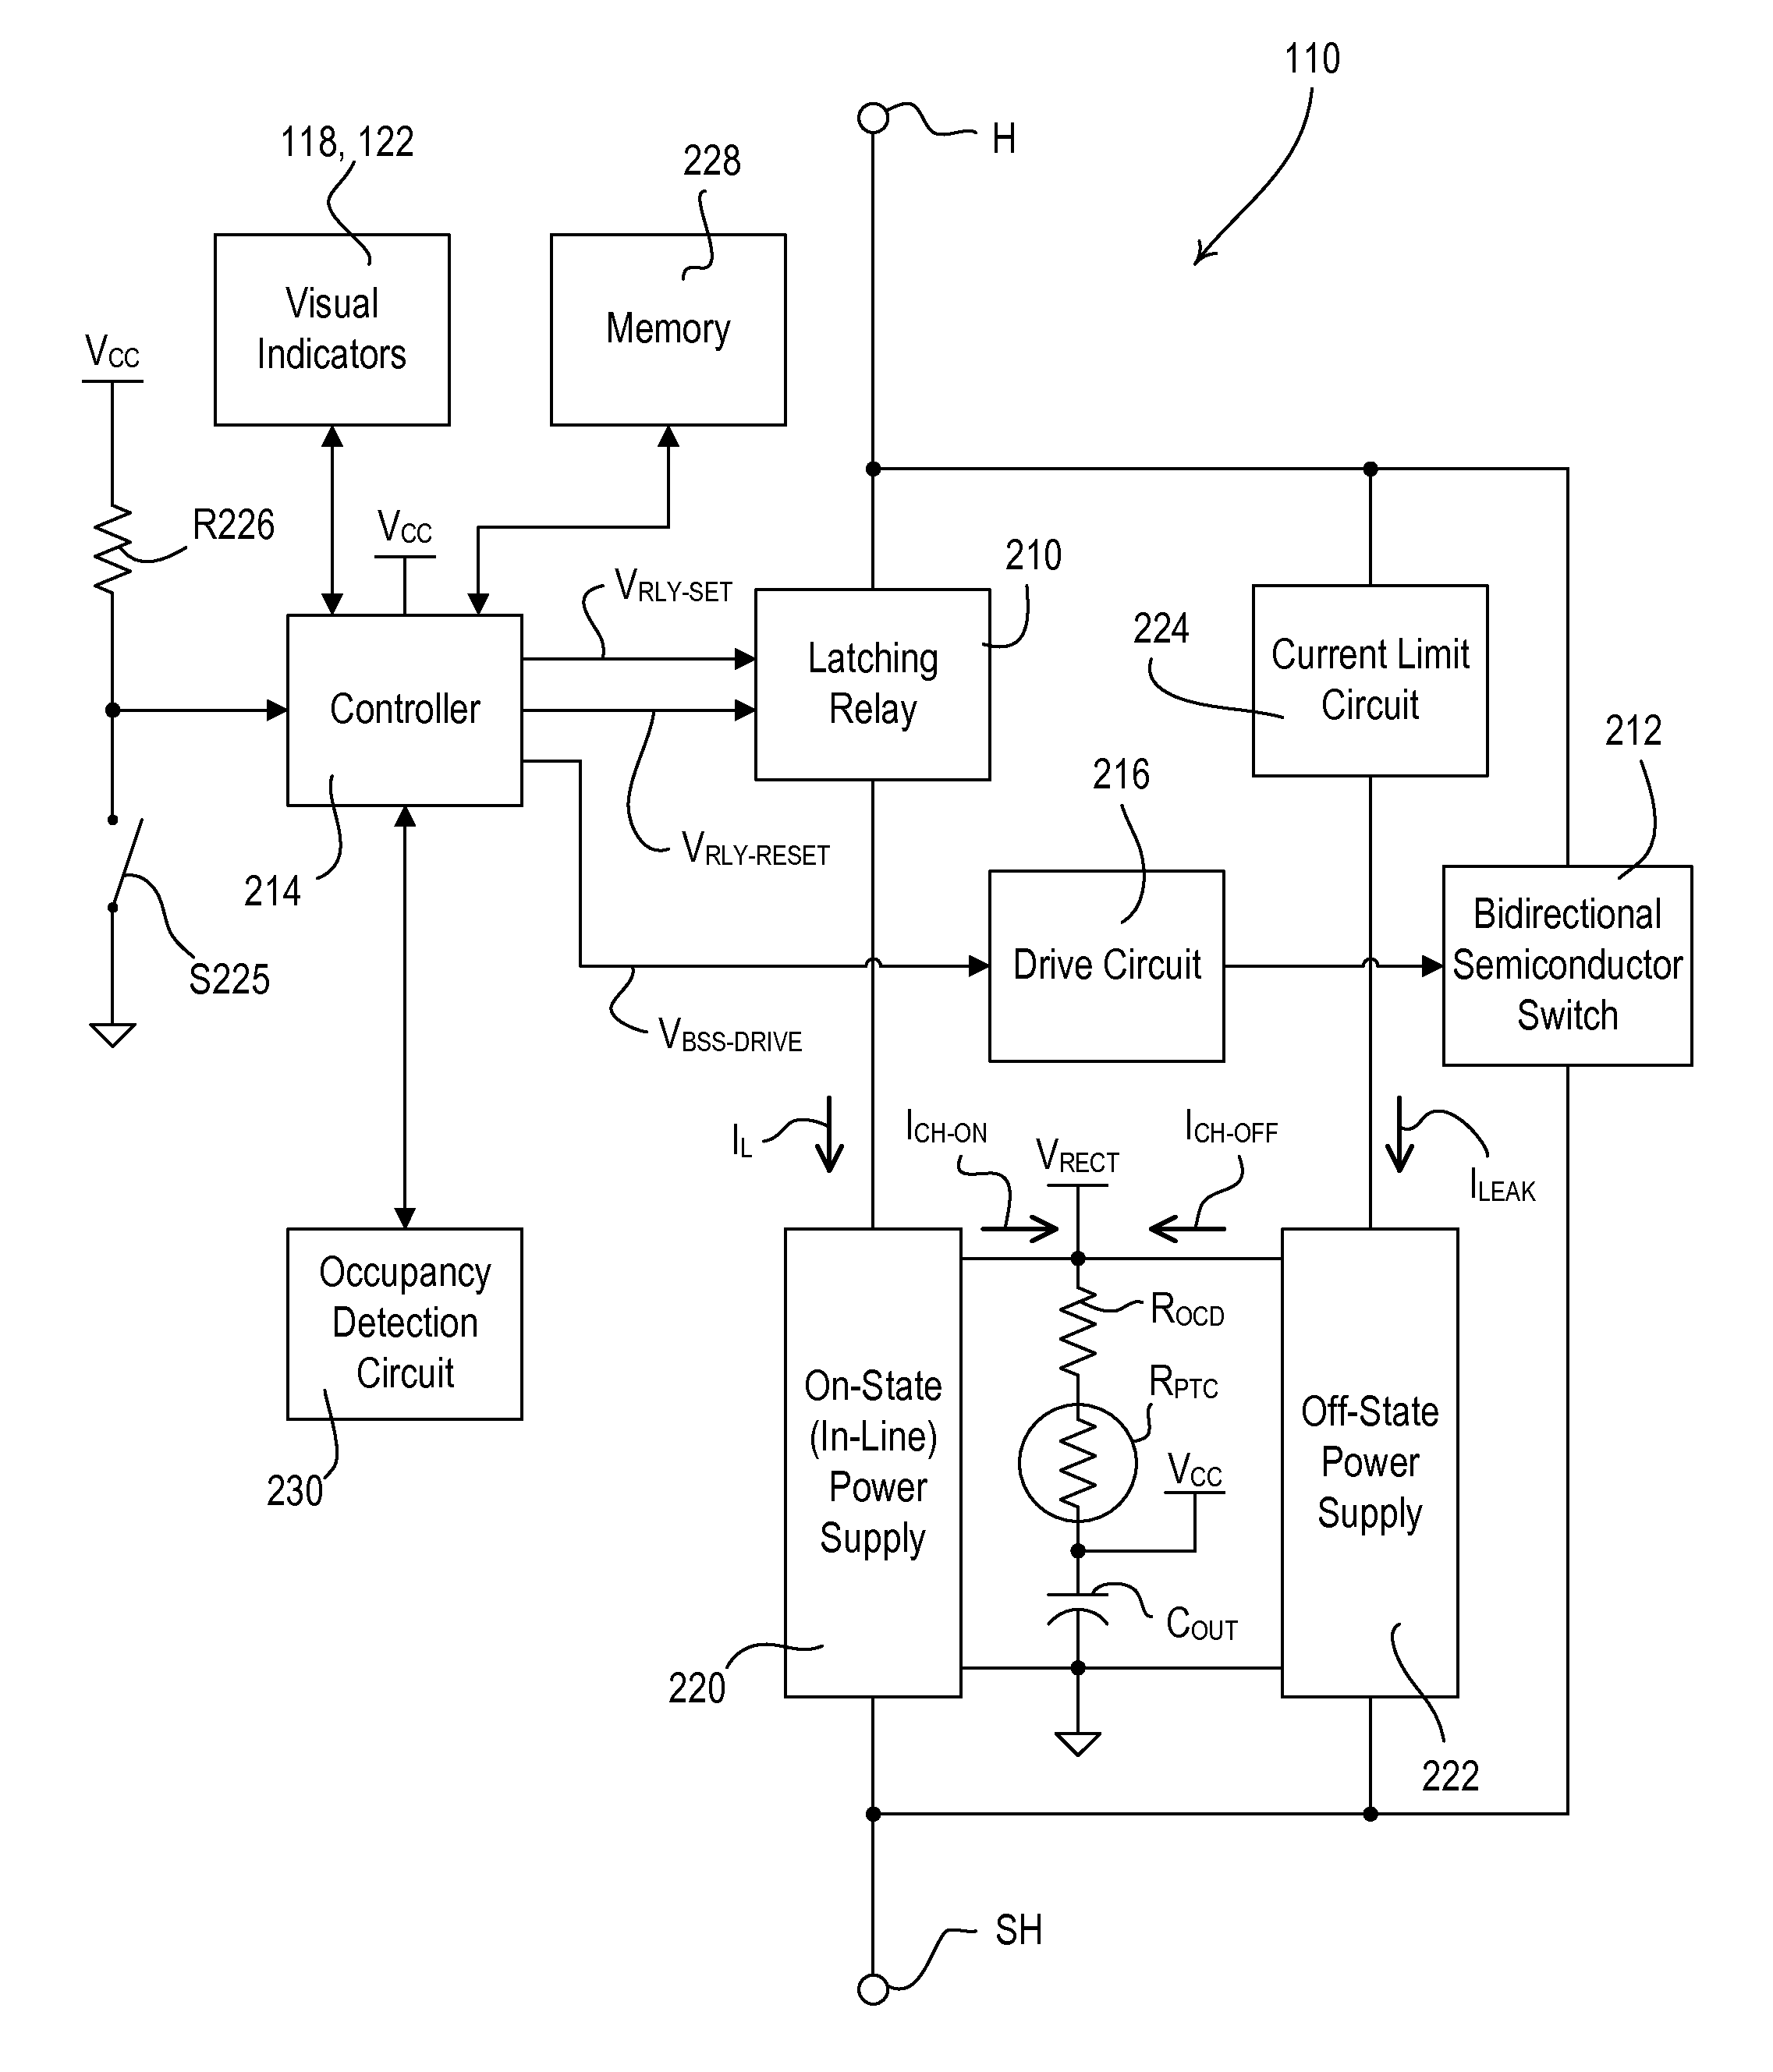 Power Supply For A Load Control Device